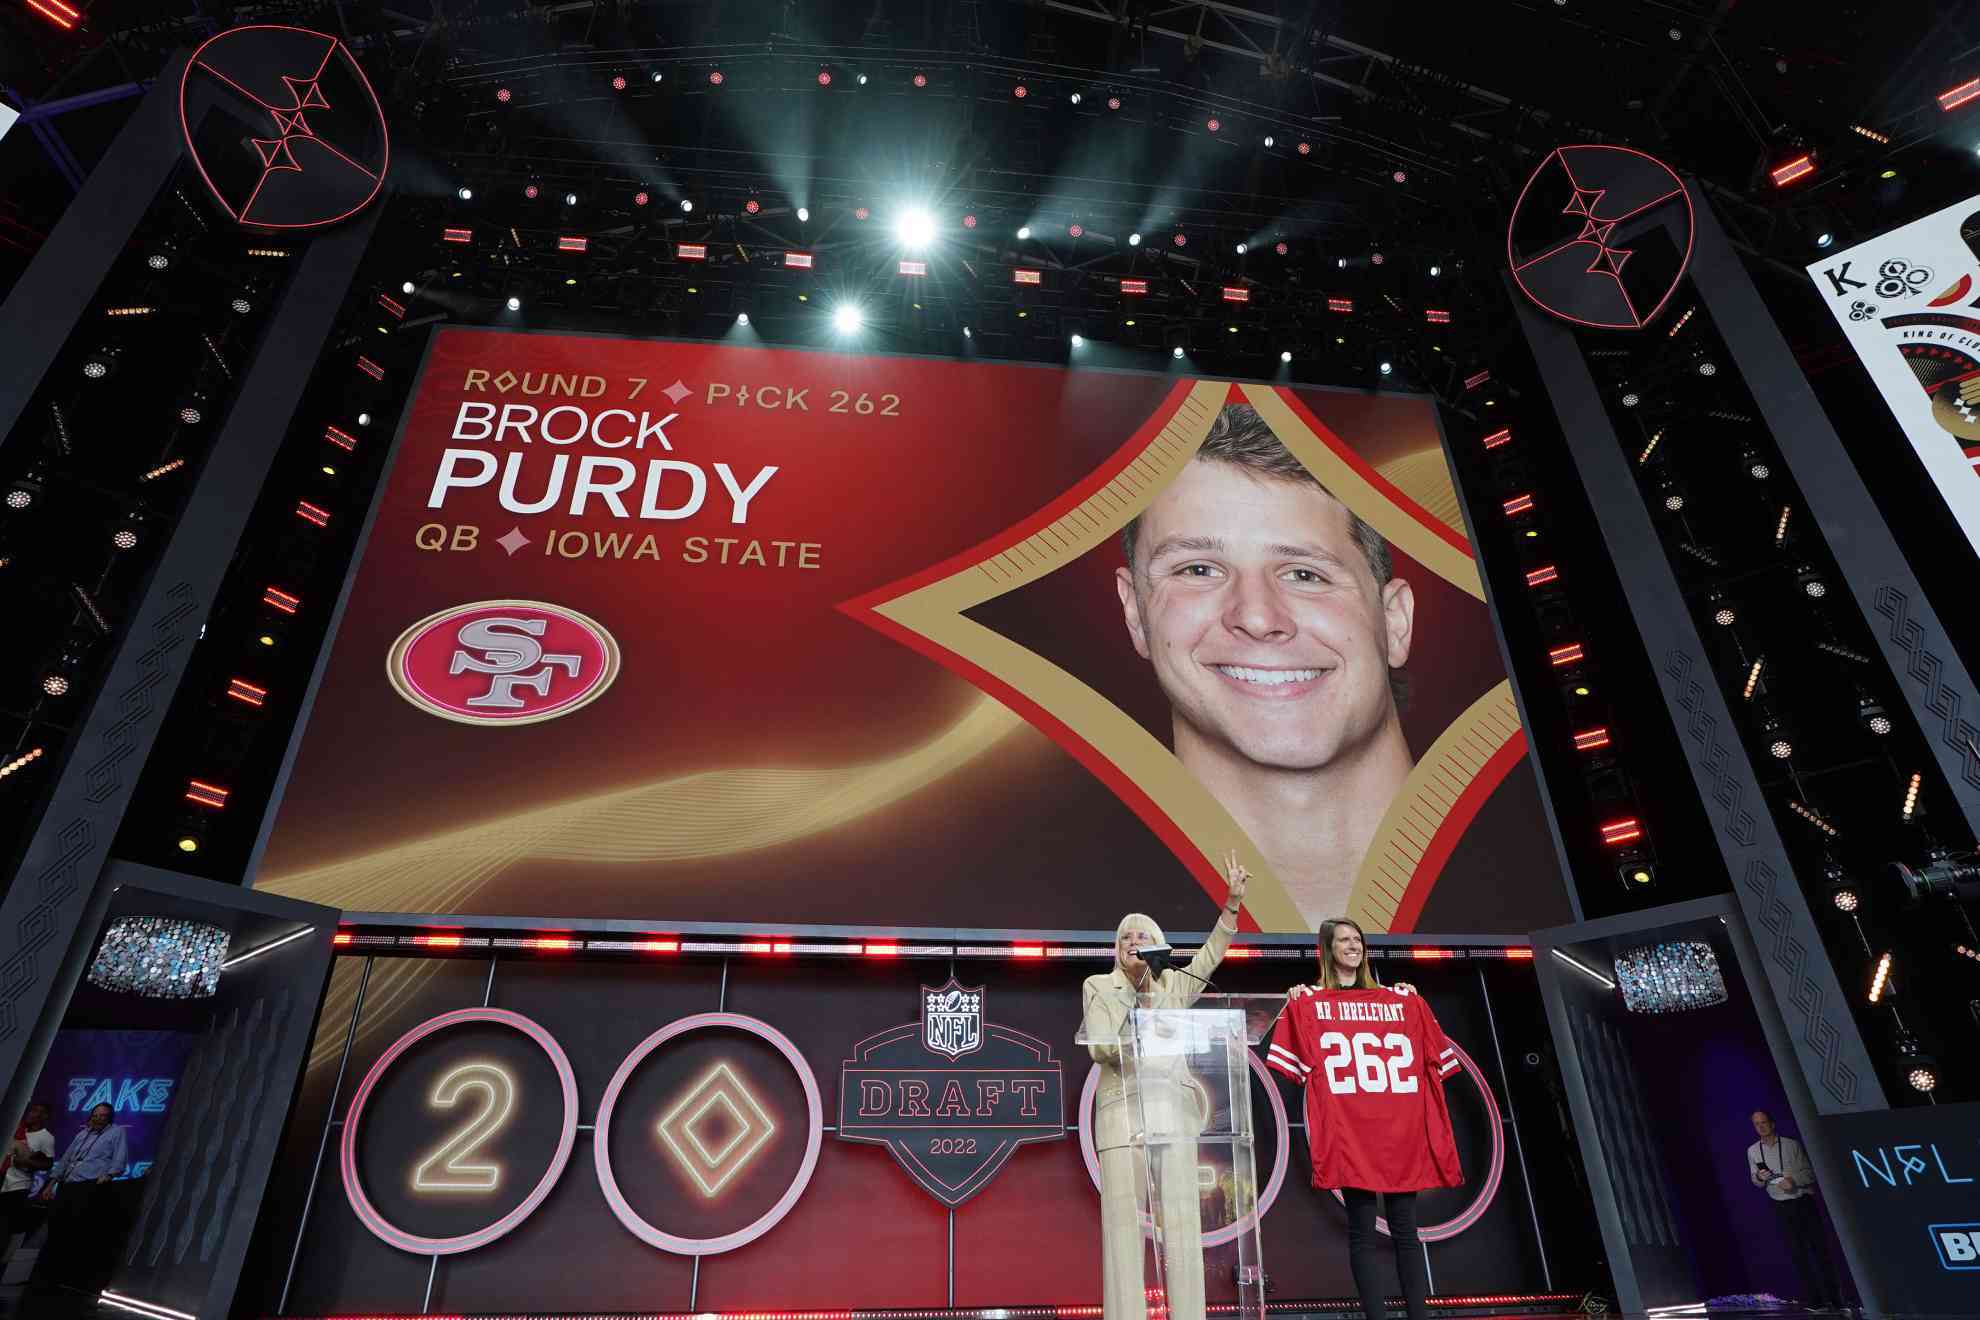 Brock Purdy was the last pick at the 2022 NFL Draft.